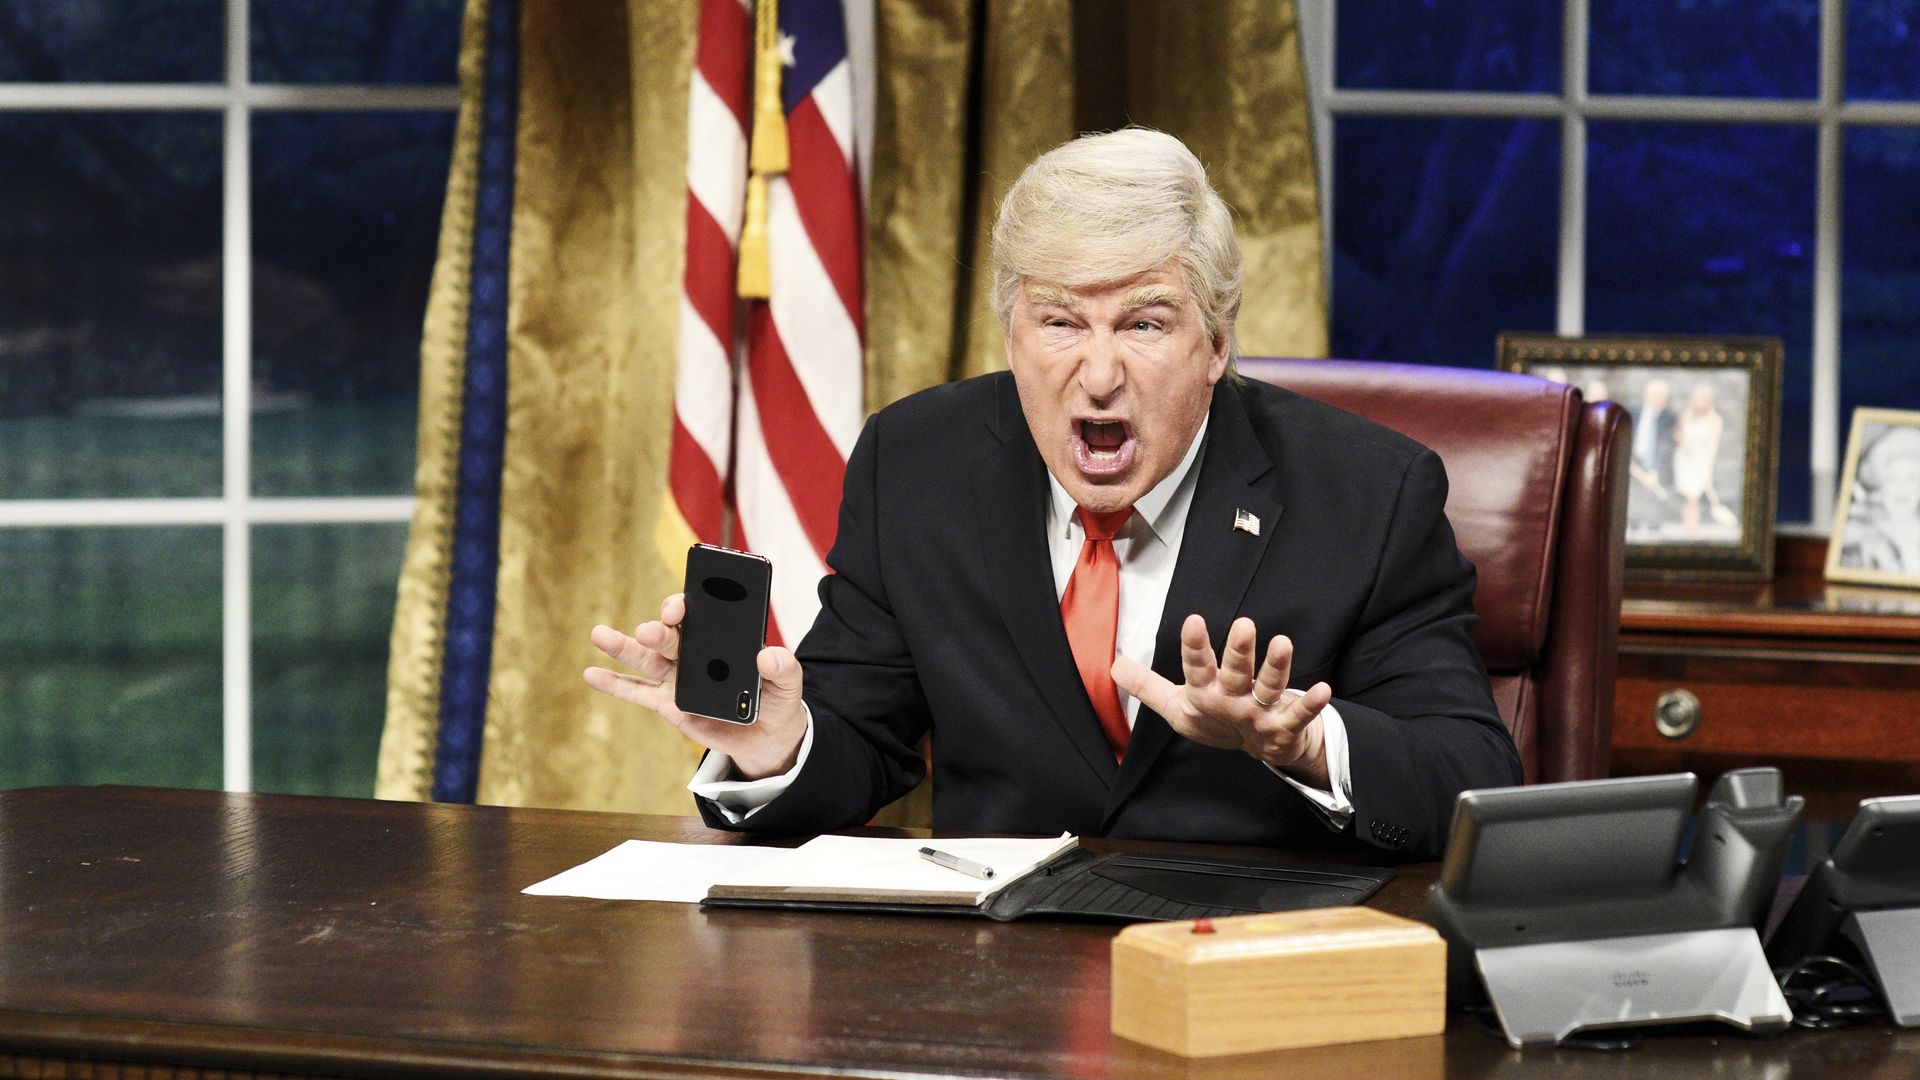  Alec Baldwin as Donald Trump during the "Mueller Report" Cold Open on Saturday, March 30